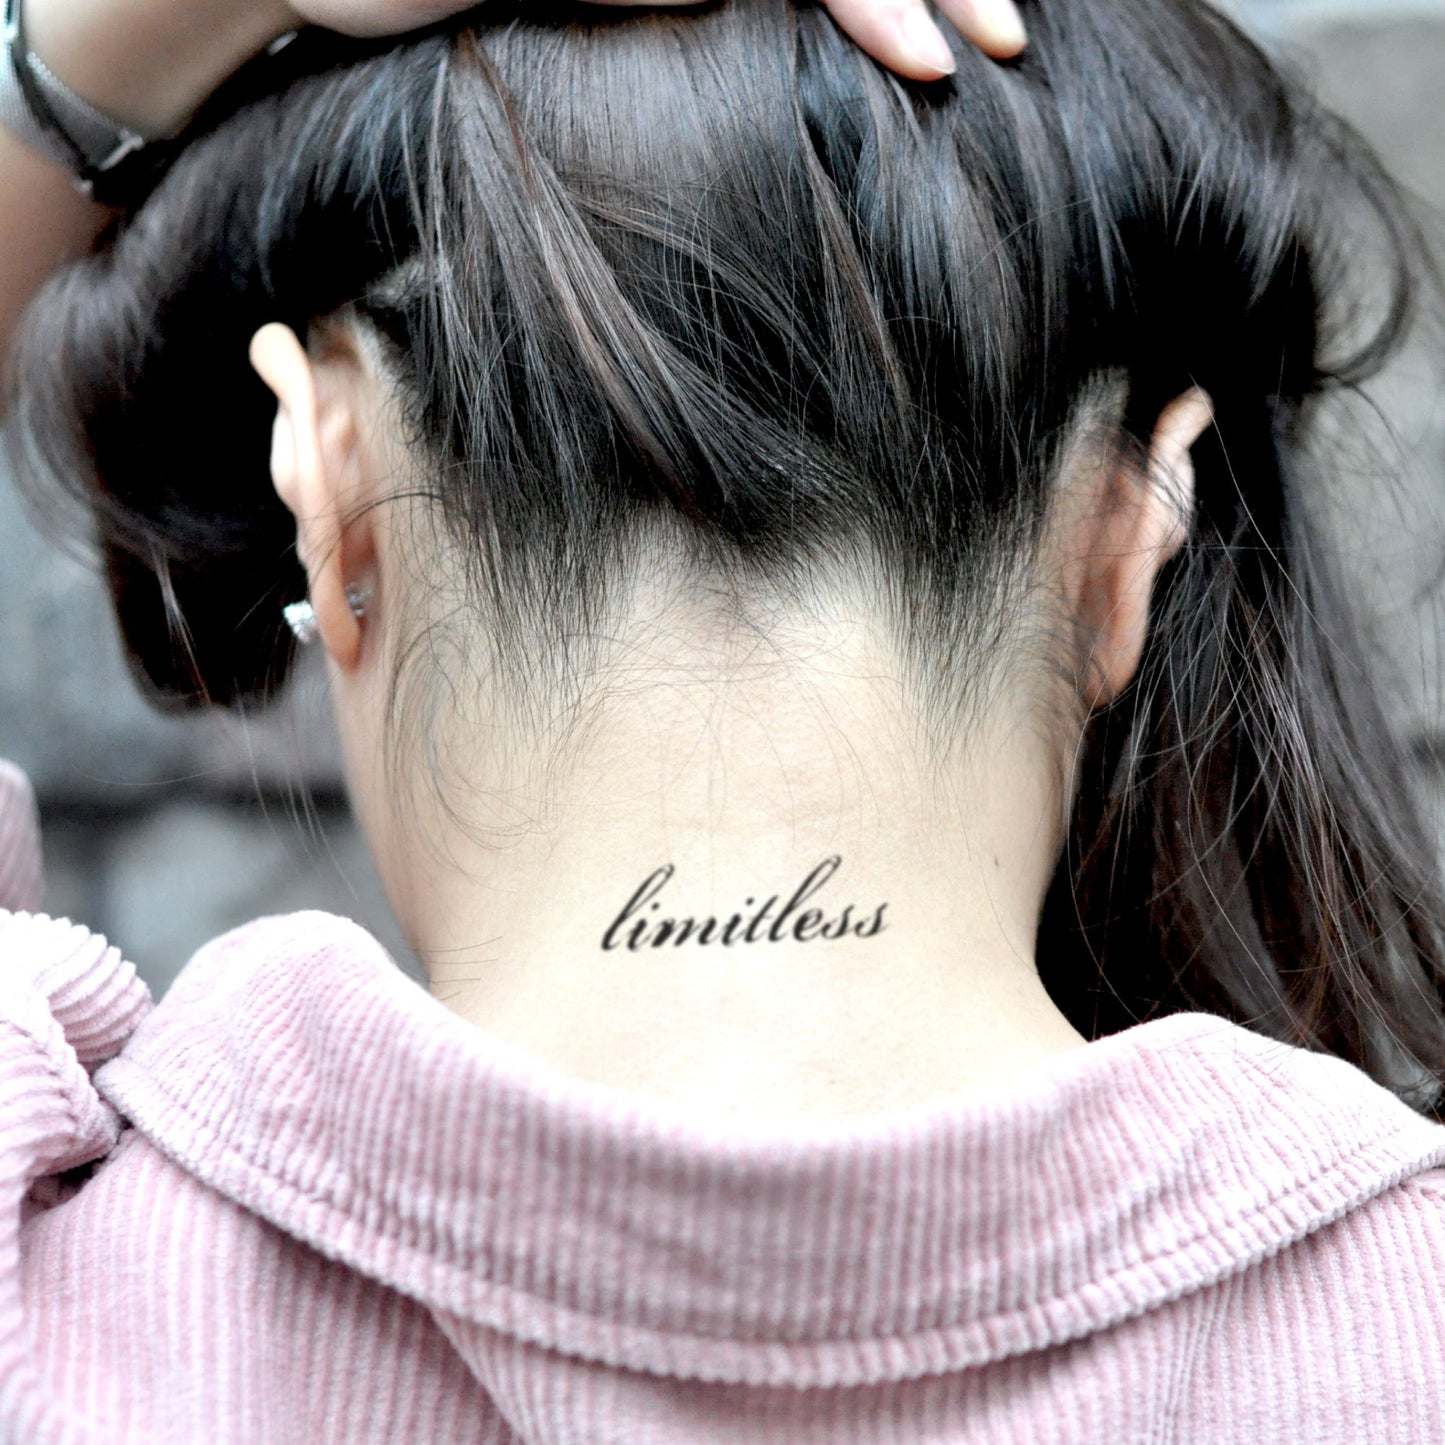 fake small limitless lettering temporary tattoo sticker design idea on neck